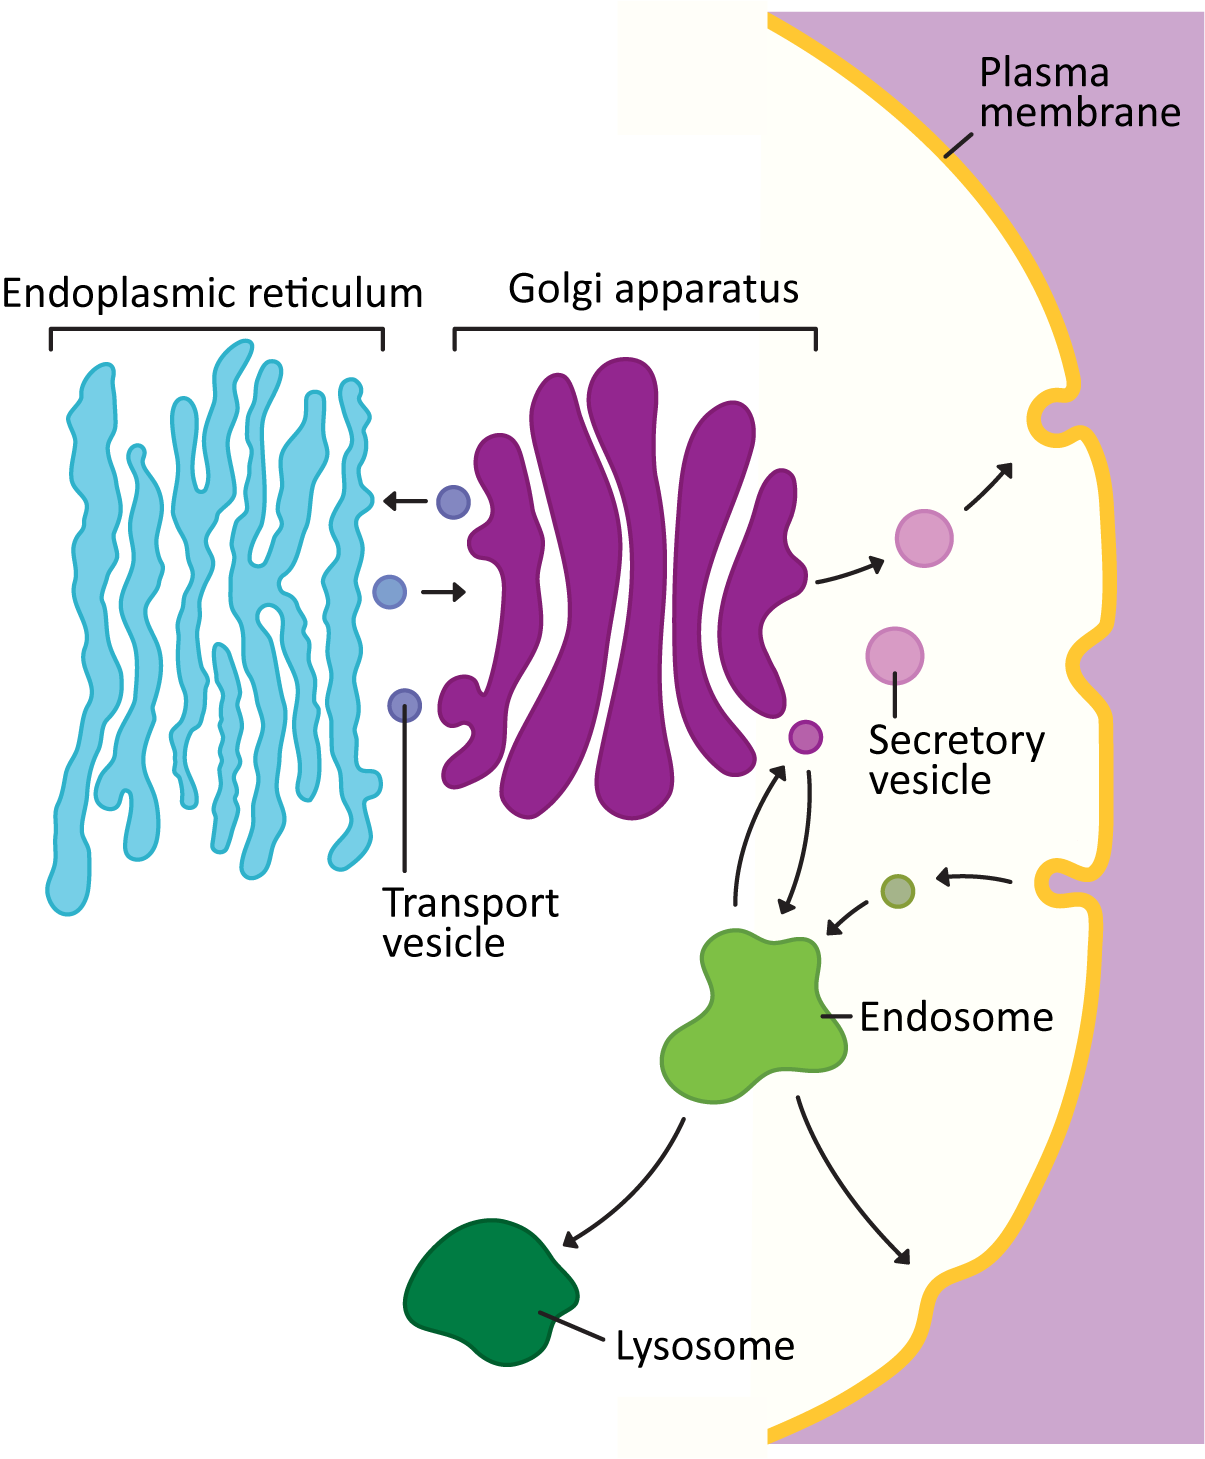 Vesicle traffic of cargo between the organelles of the endomembrane system